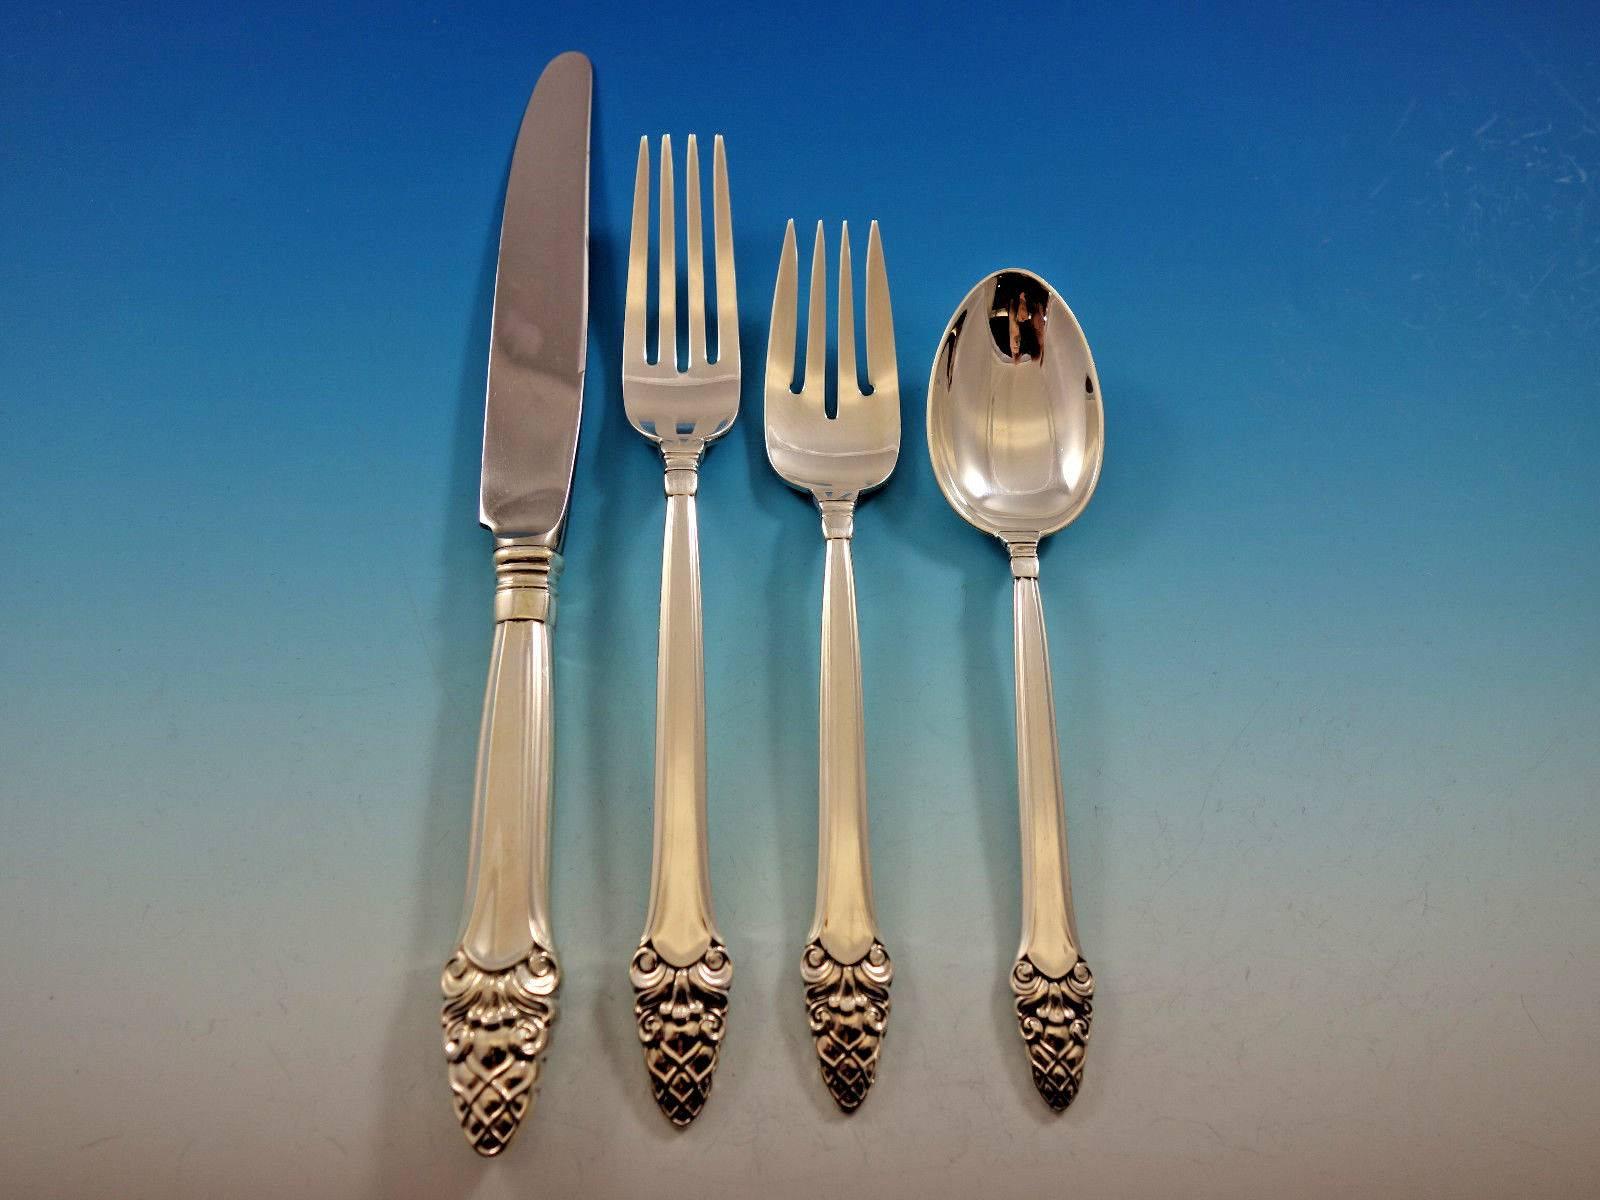 Sovereign old by Gorham sterling silver flatware set, 32 pieces. This set includes: 

Eight knives, 8 7/8